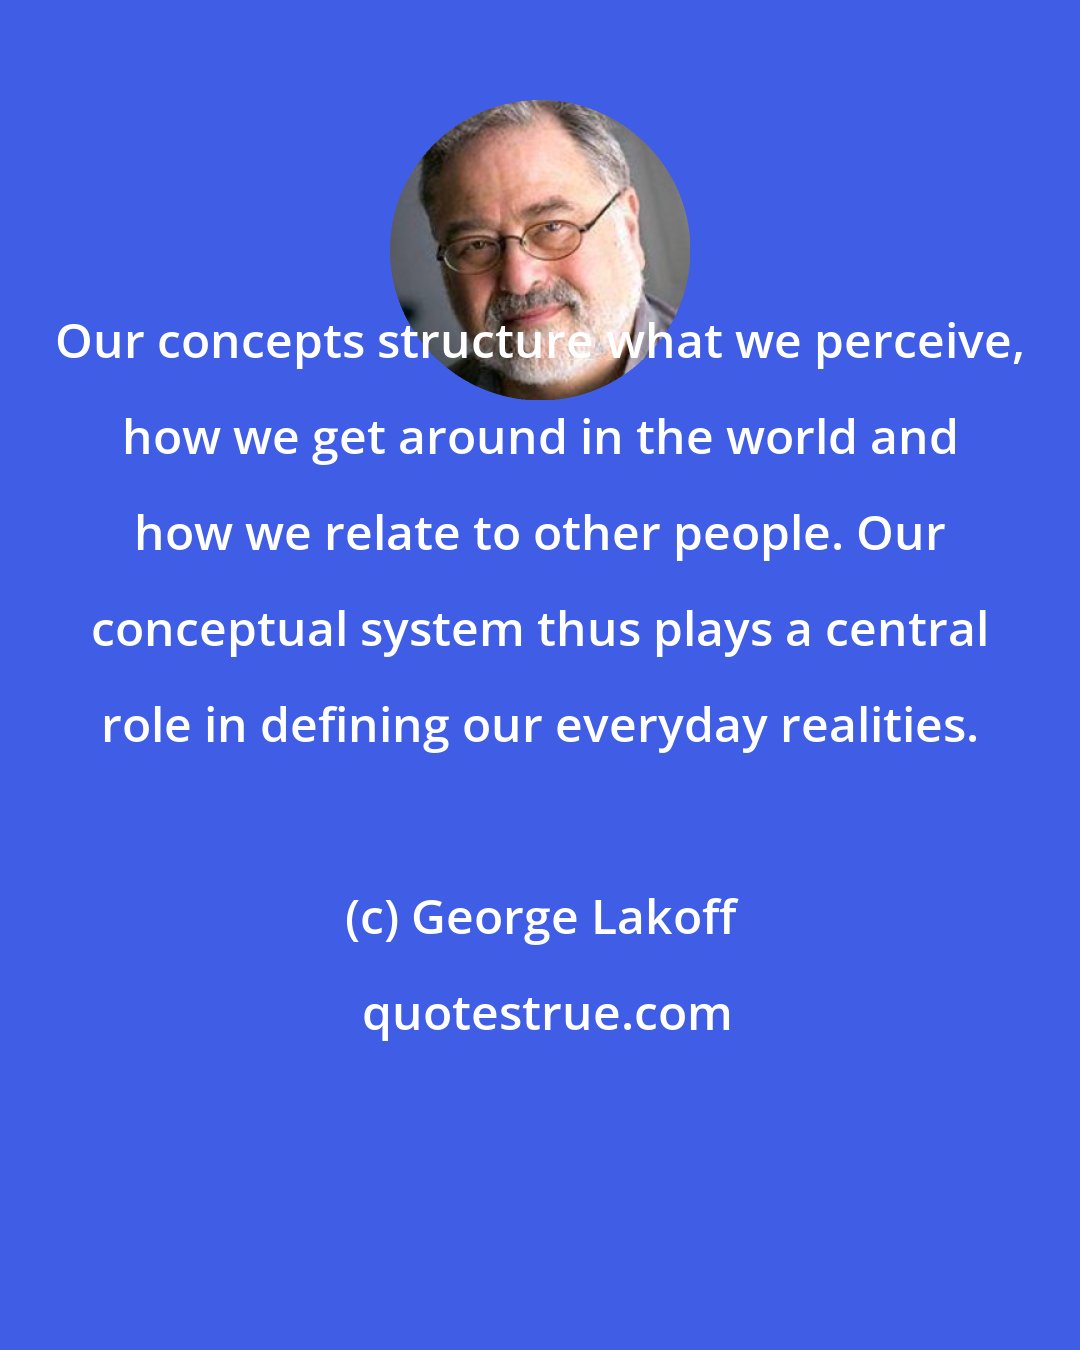 George Lakoff: Our concepts structure what we perceive, how we get around in the world and how we relate to other people. Our conceptual system thus plays a central role in defining our everyday realities.